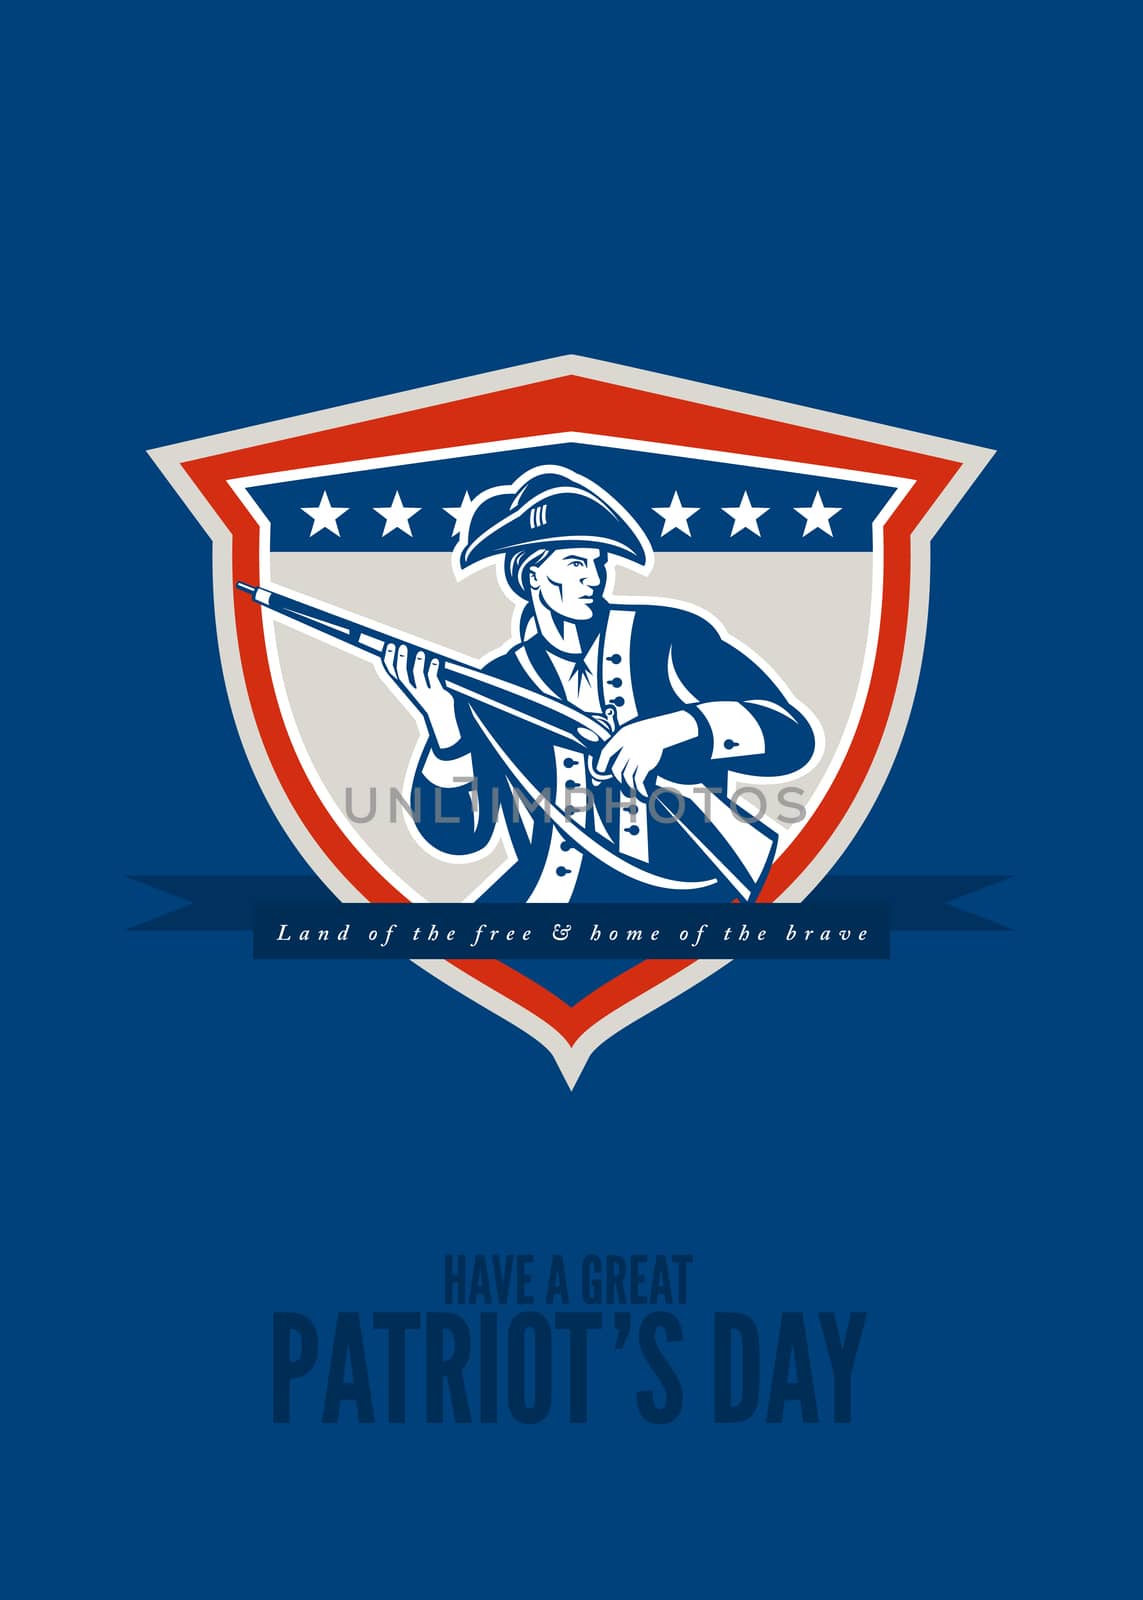 Patriots Day�greeting card featuring an illustration of an American Patriot holding a musket rifle looking to the side set inside crest shield with stars on isolated background done in retro style with the words Land of the Free & Home of the Brave, Have a great Patriot's Day